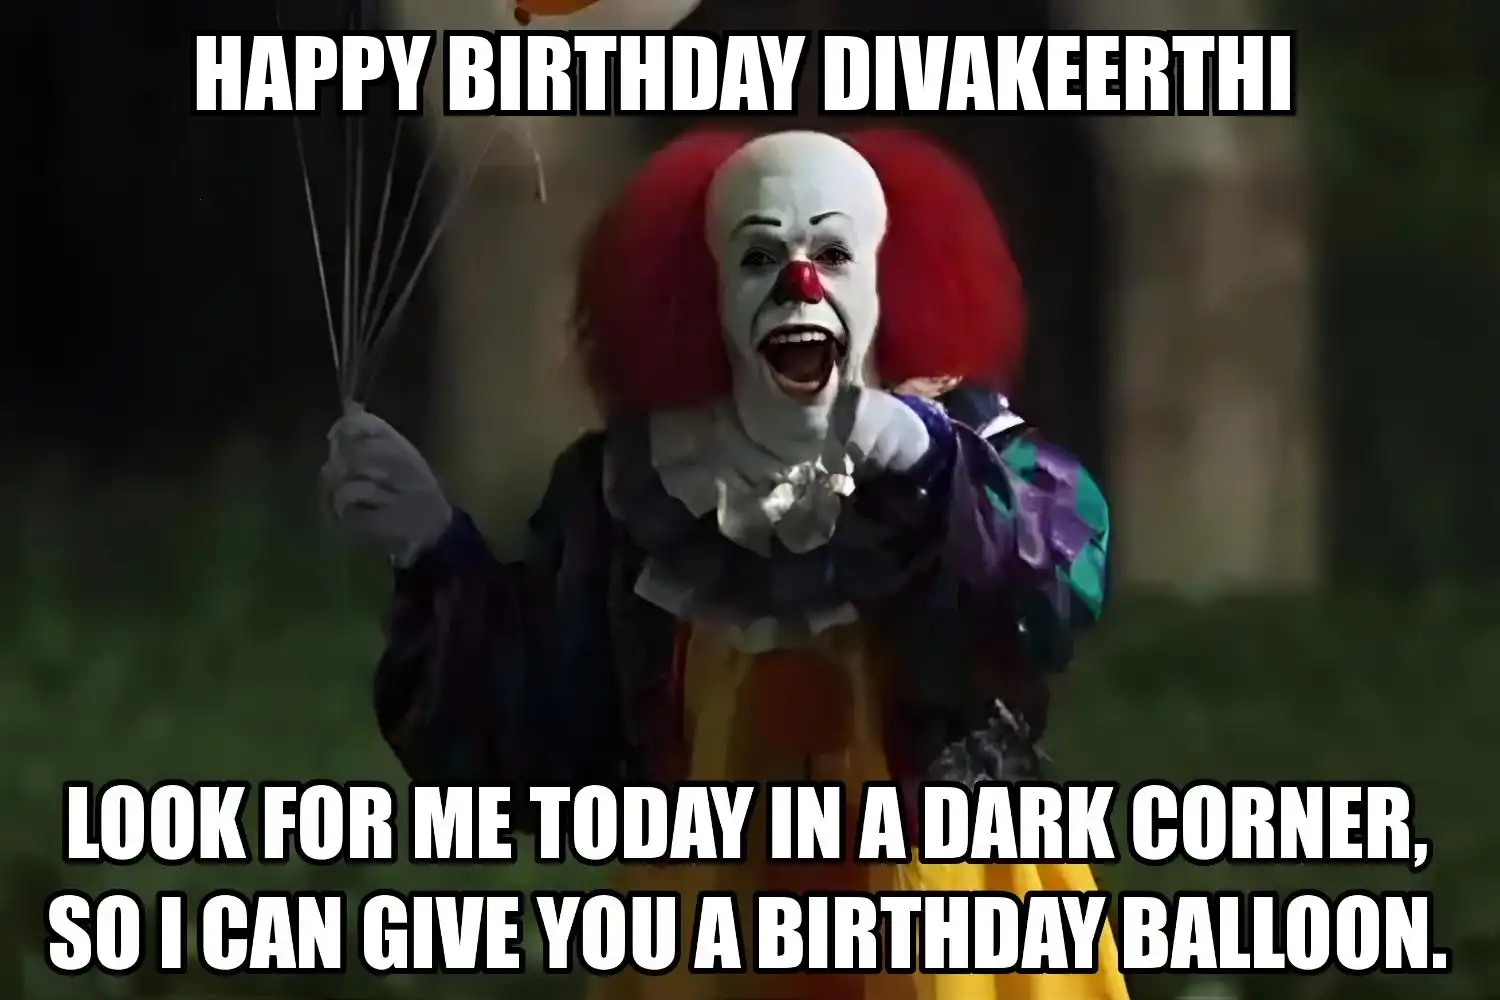 Happy Birthday Divakeerthi I Can Give You A Balloon Meme